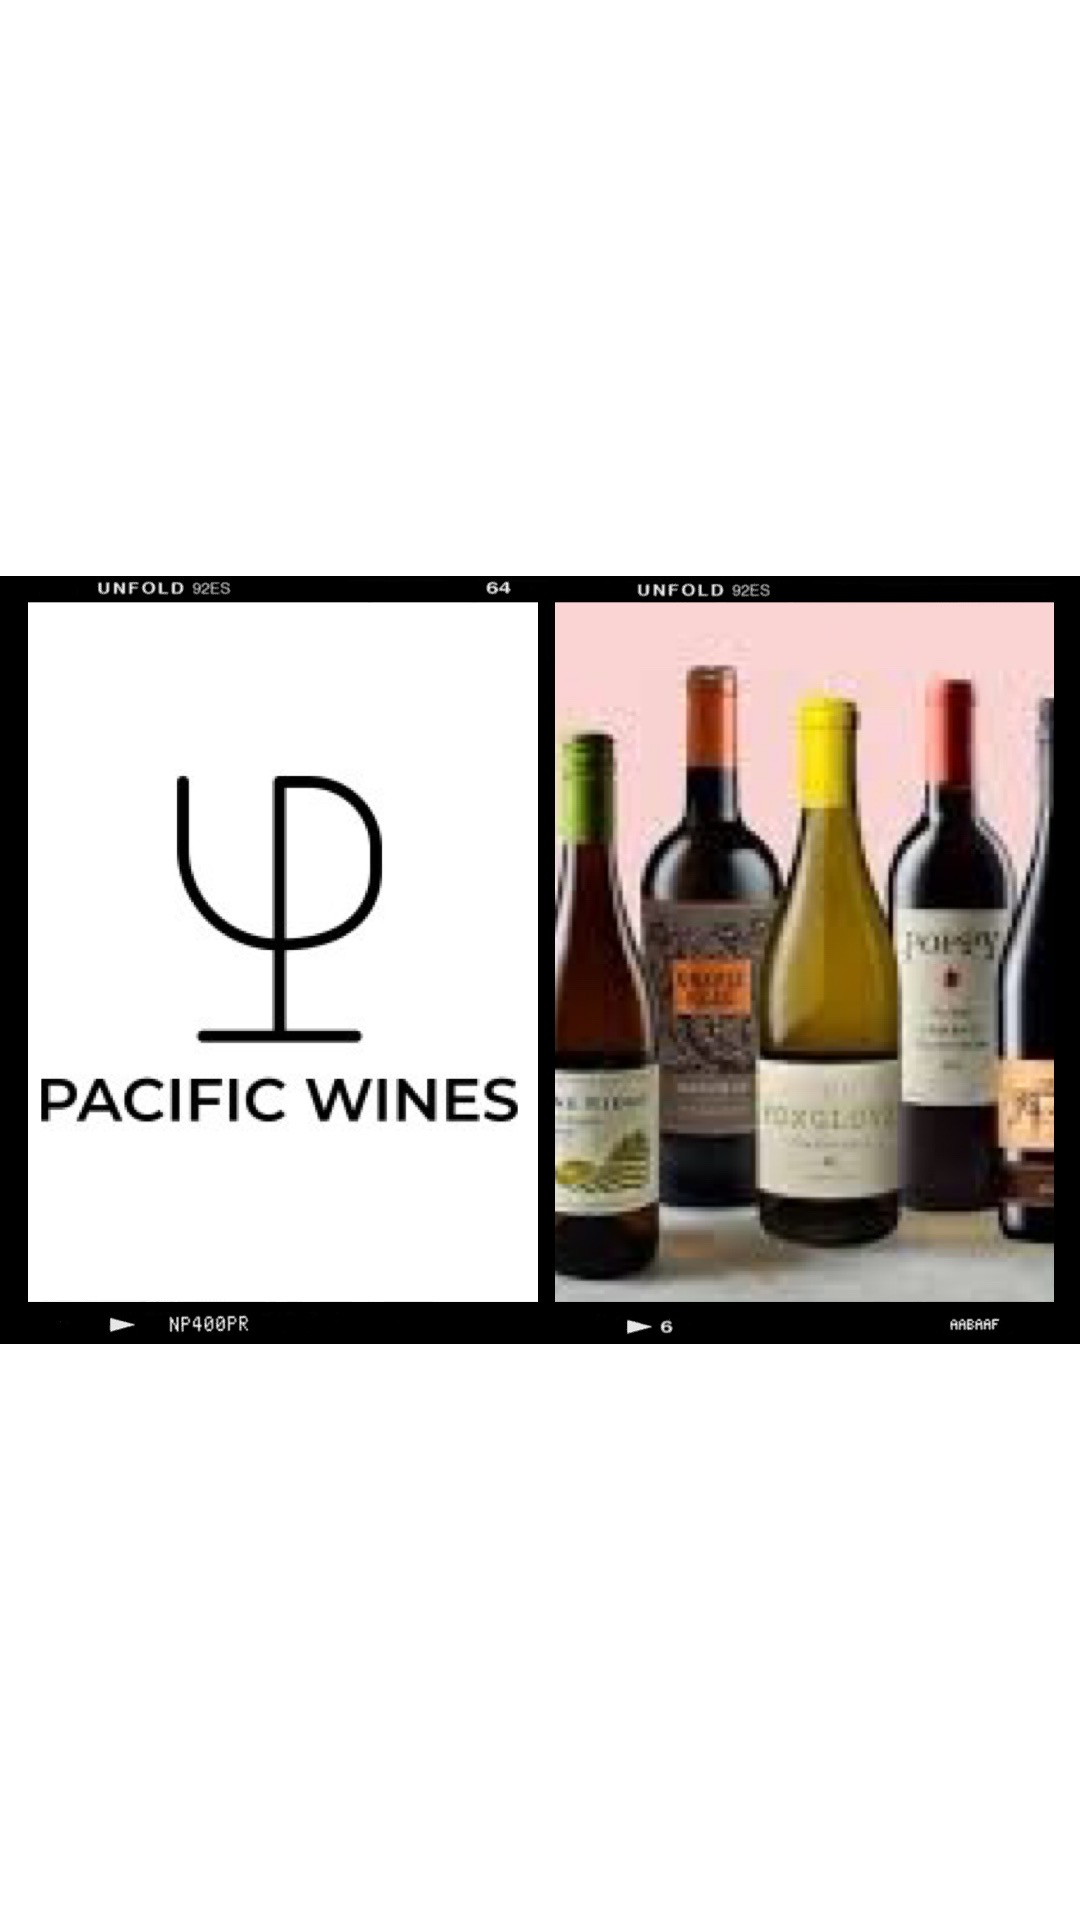 Pacific Wines embraces bricks and mortar specializing in US Wines